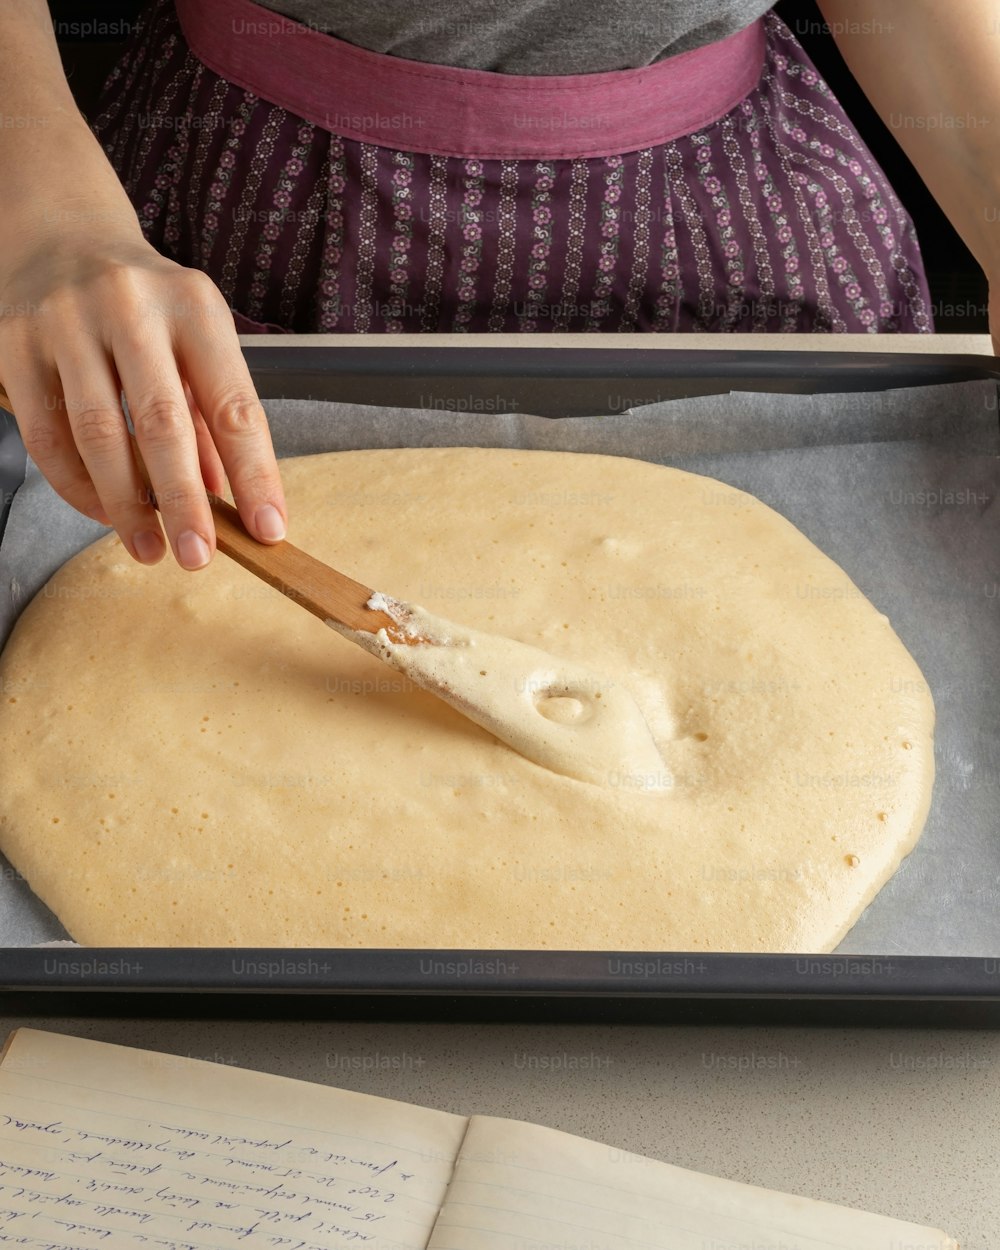 Preparation of a Swiss roll - spreading the raw dough over a baking sheet